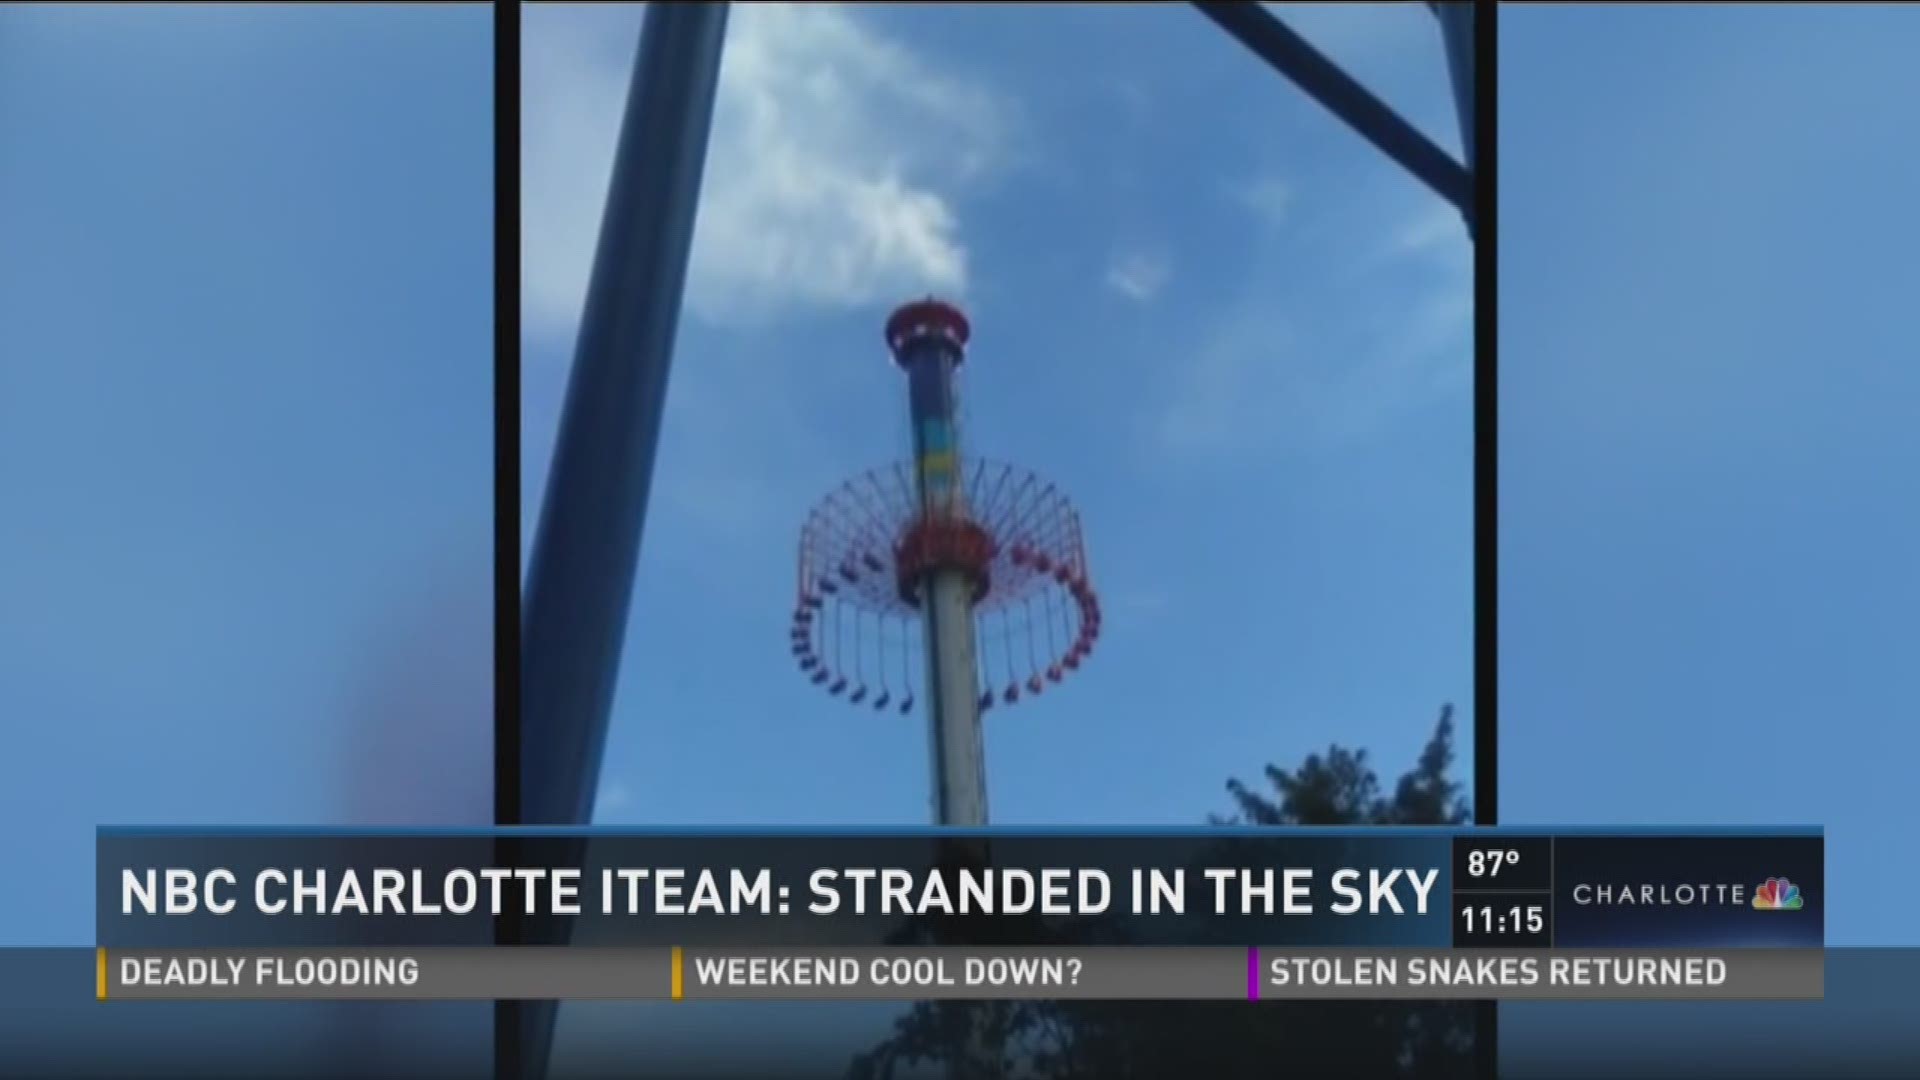 After a power outage at Carowinds stranded riders over 100 feet in the air, NBC Charlotte's Mark Boyle learned what is being done to prevent these incidents from happening again.